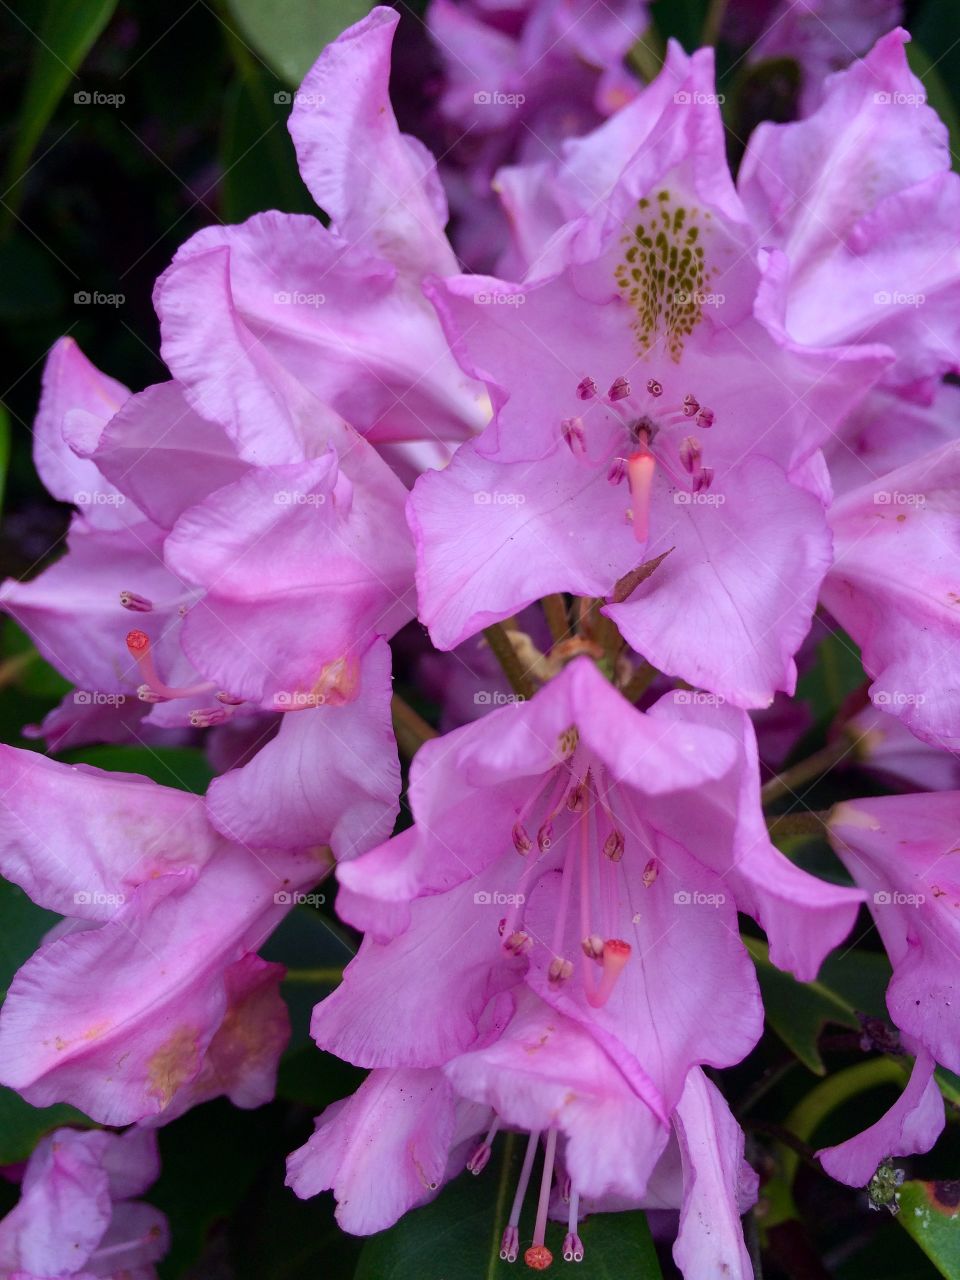 Rhododendron Flowers in the Arnold Arboretum 